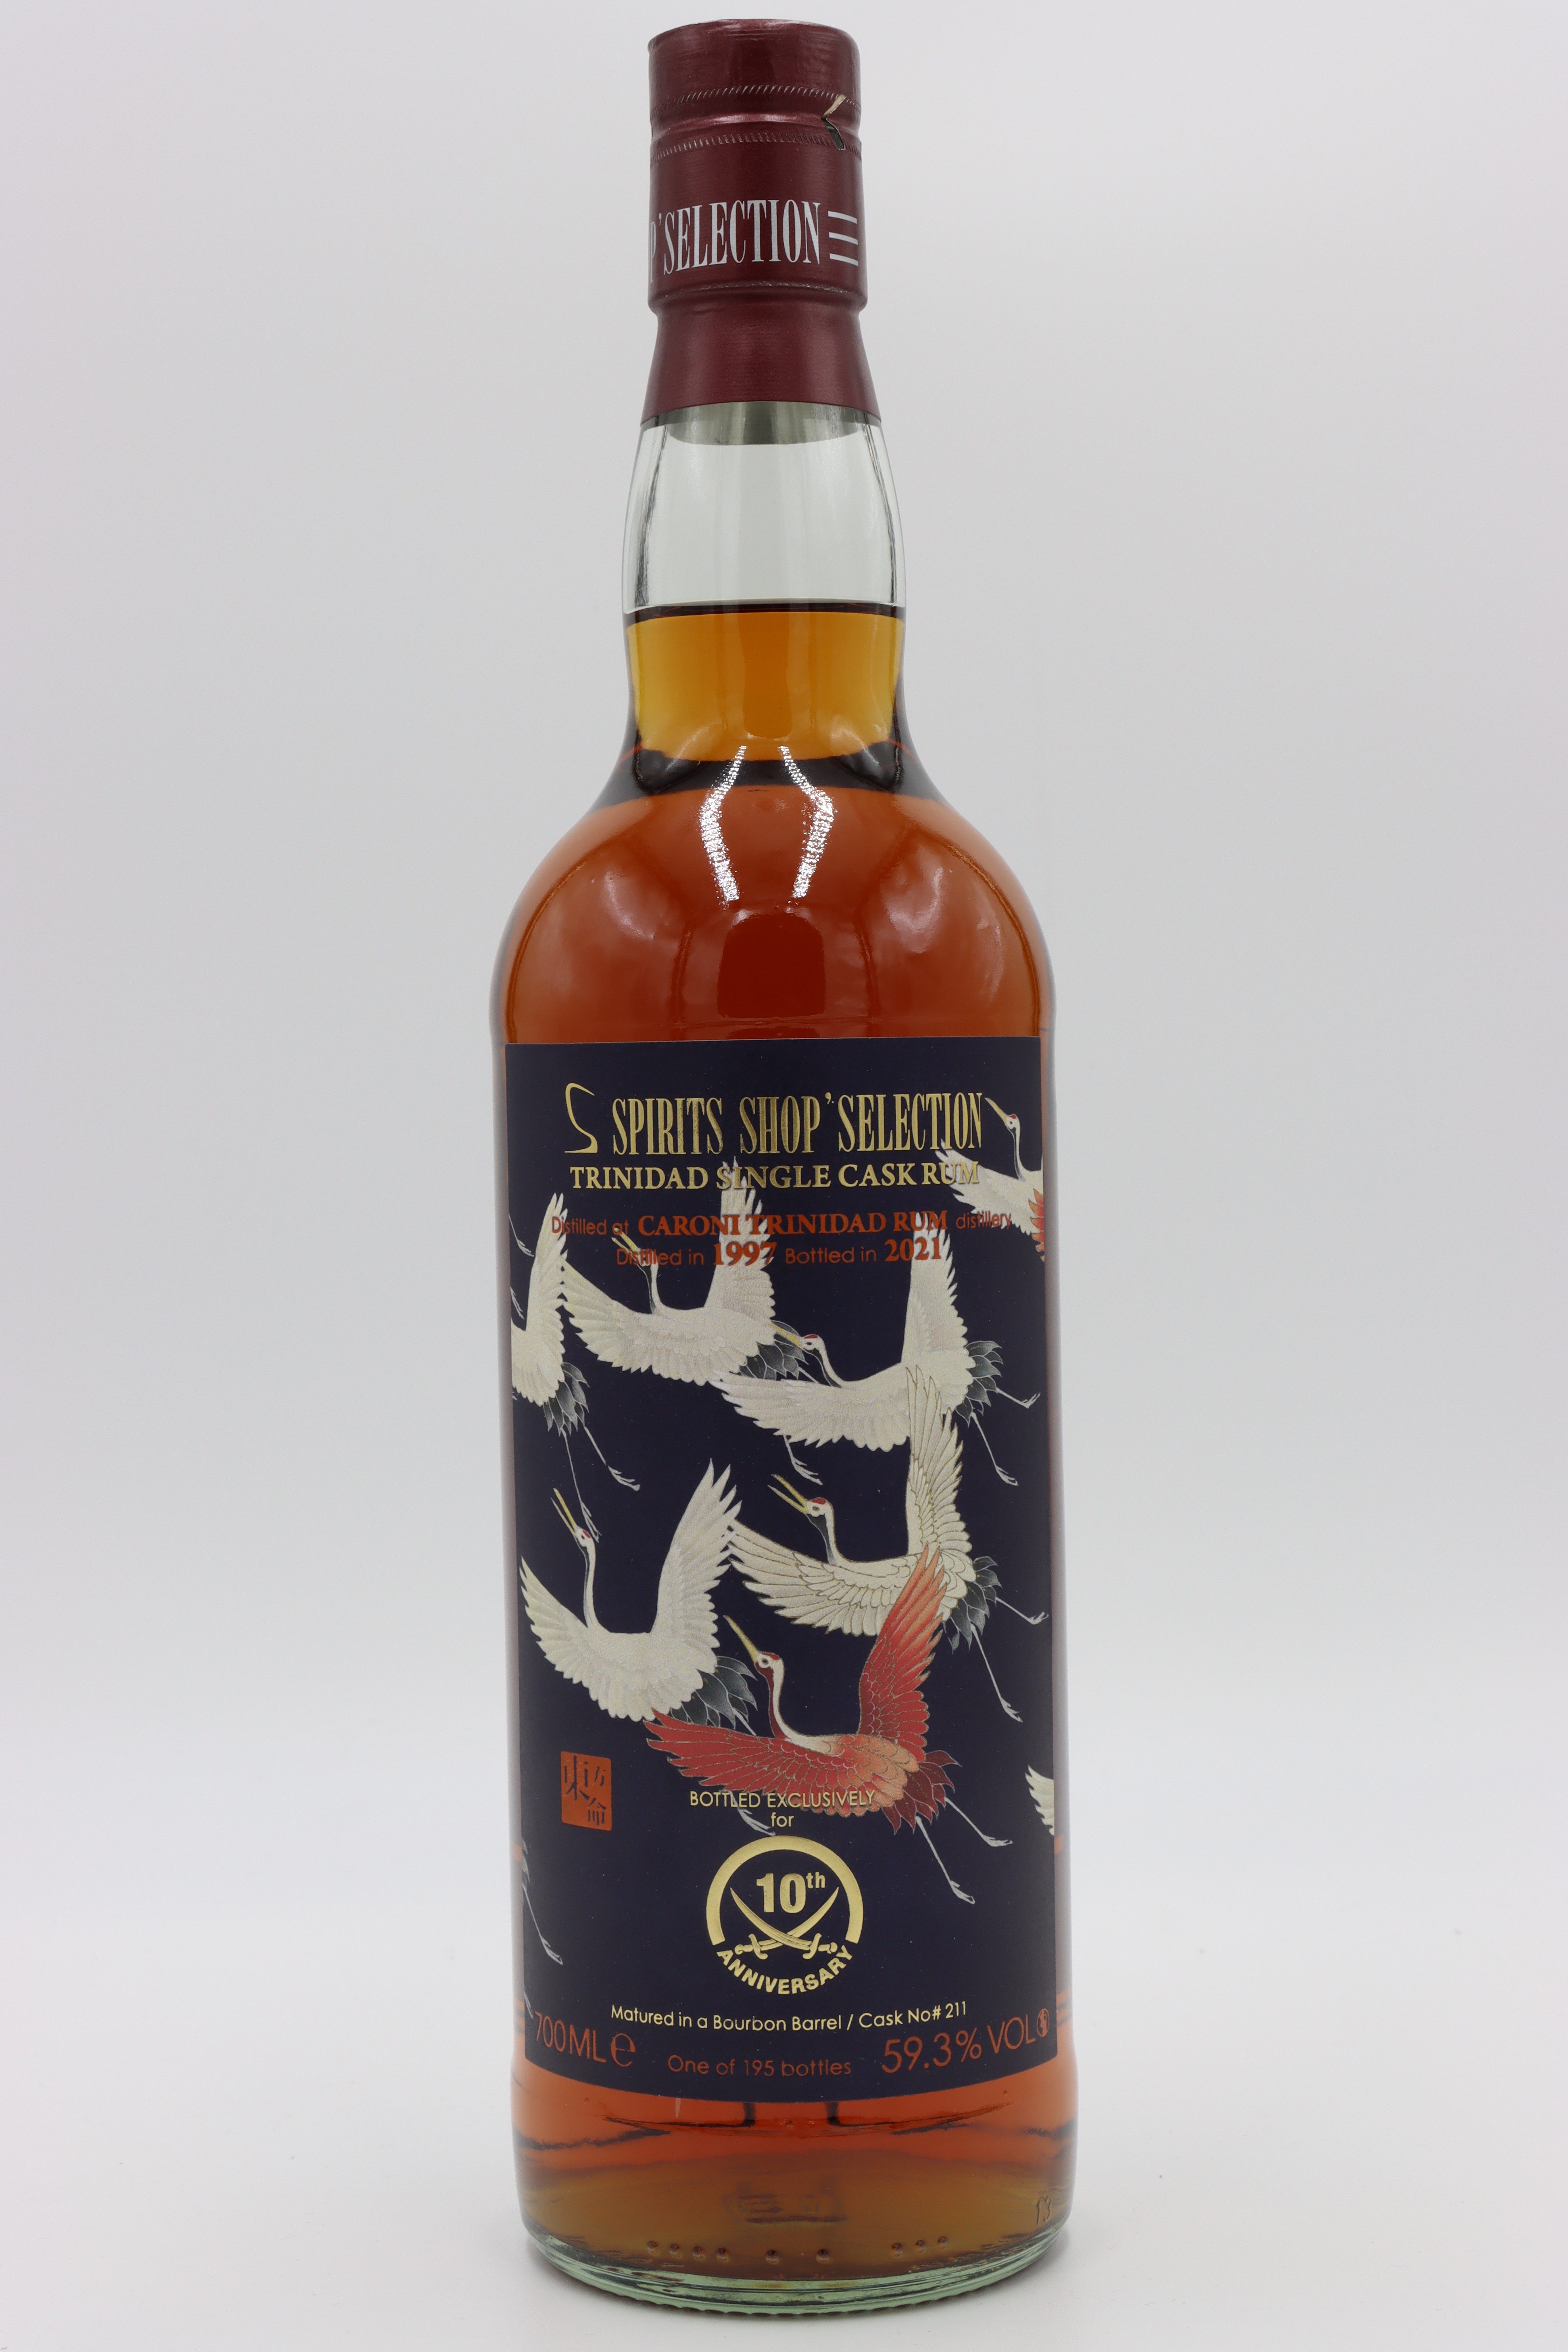 Caroni 24y - 10th Anniversary Bottling by S-Spirits Shop Selection